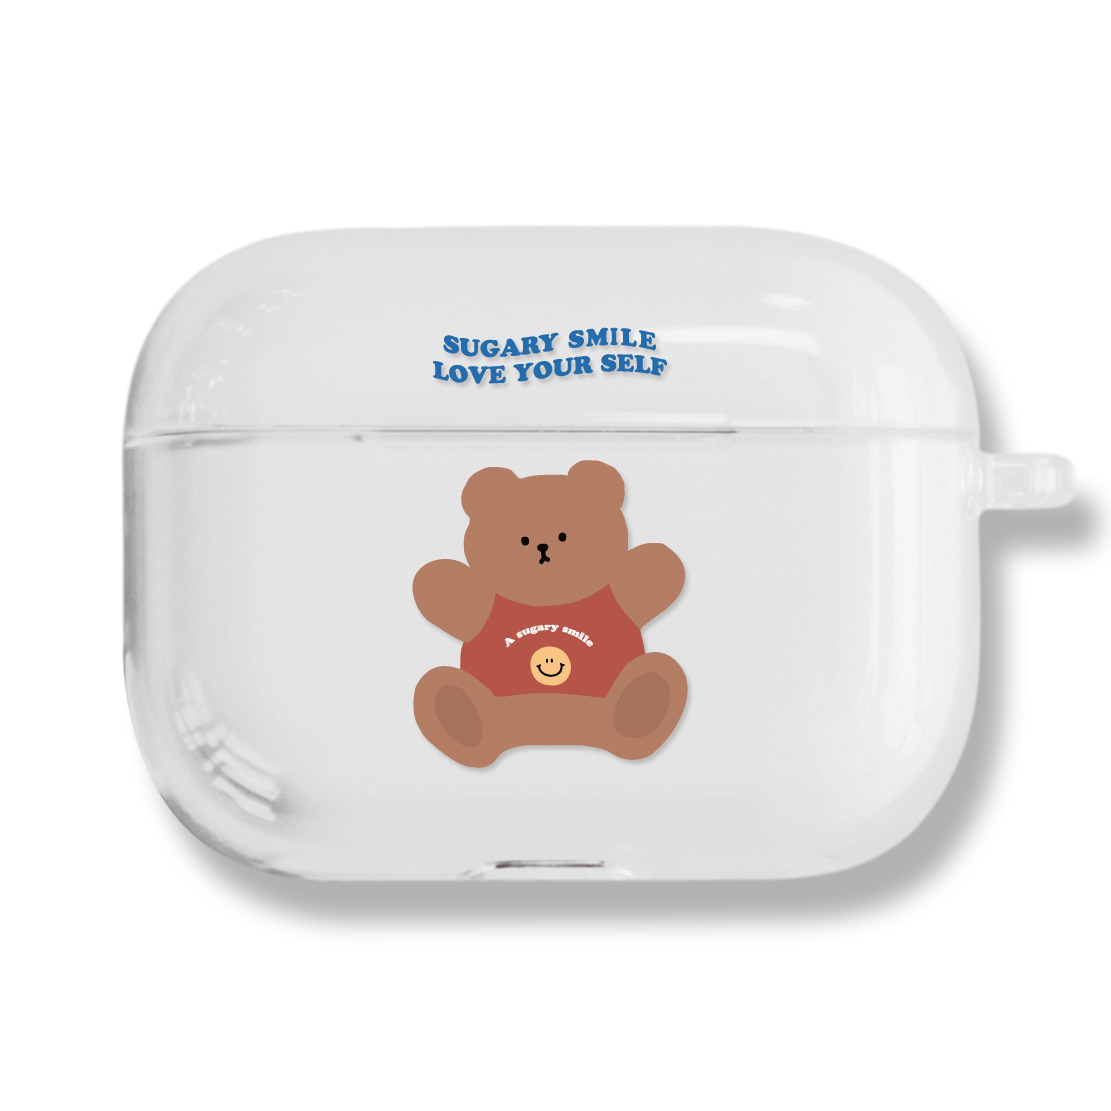 [CLEAR AIRPODS PRO] 621 Sugary bear